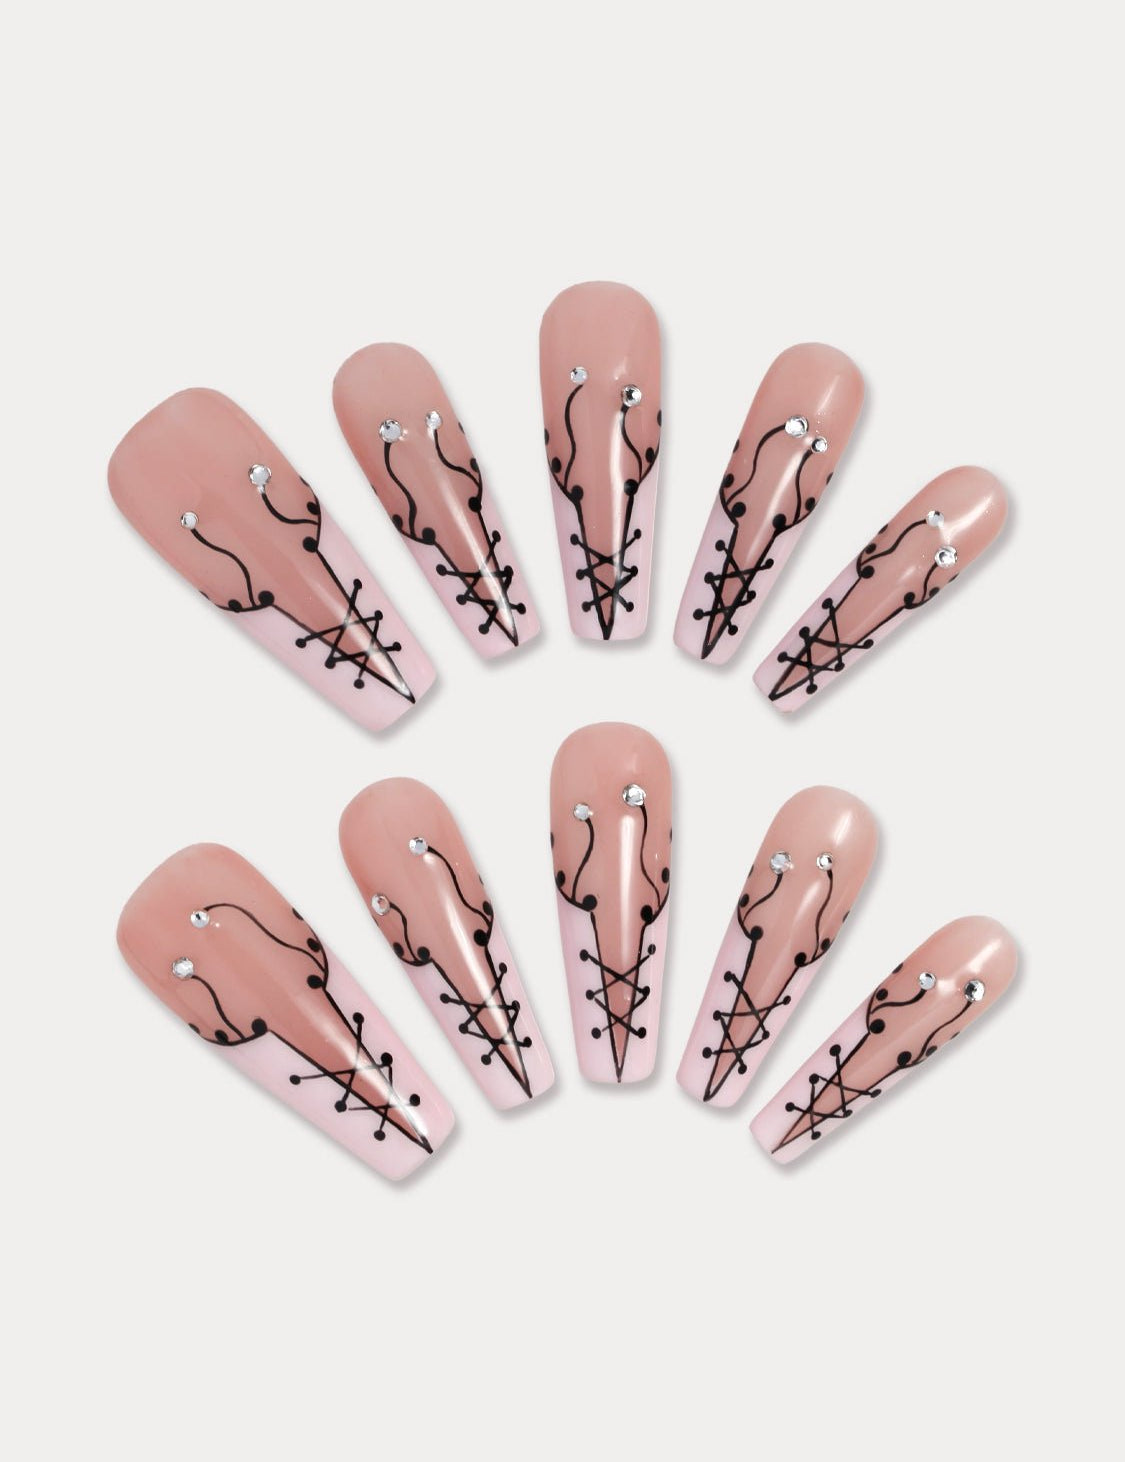 The Lace-Up press on nail design takes inspiration from vintage corset lacing, meticulously handcrafted for a unique look. The combination of pink and black adds a playful and cute touch with a hint of allure. #MIEAP #MIEAPnails #pressonnail #falsenail #acrylicnail #nails #nailart #naildesign #nailinspo #handmadenail #summernail #nail2023 #graduationnail #longnail #coffinnail